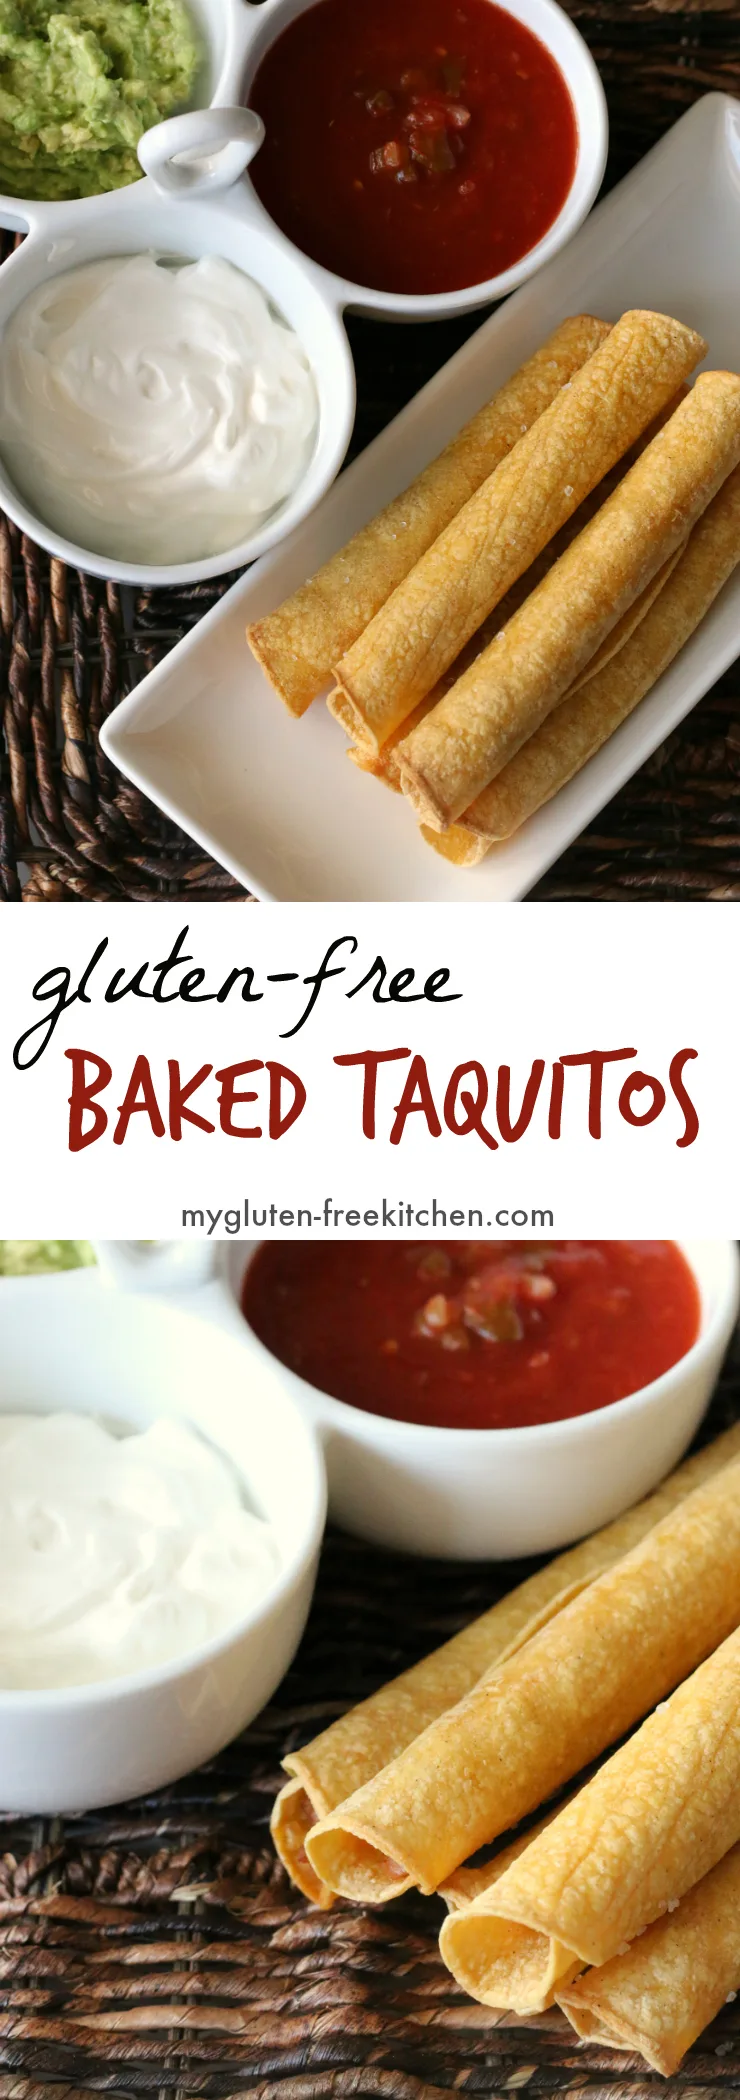 Gluten-free Baked Taquitos Recipe. Love this for an appetizer for the big game!